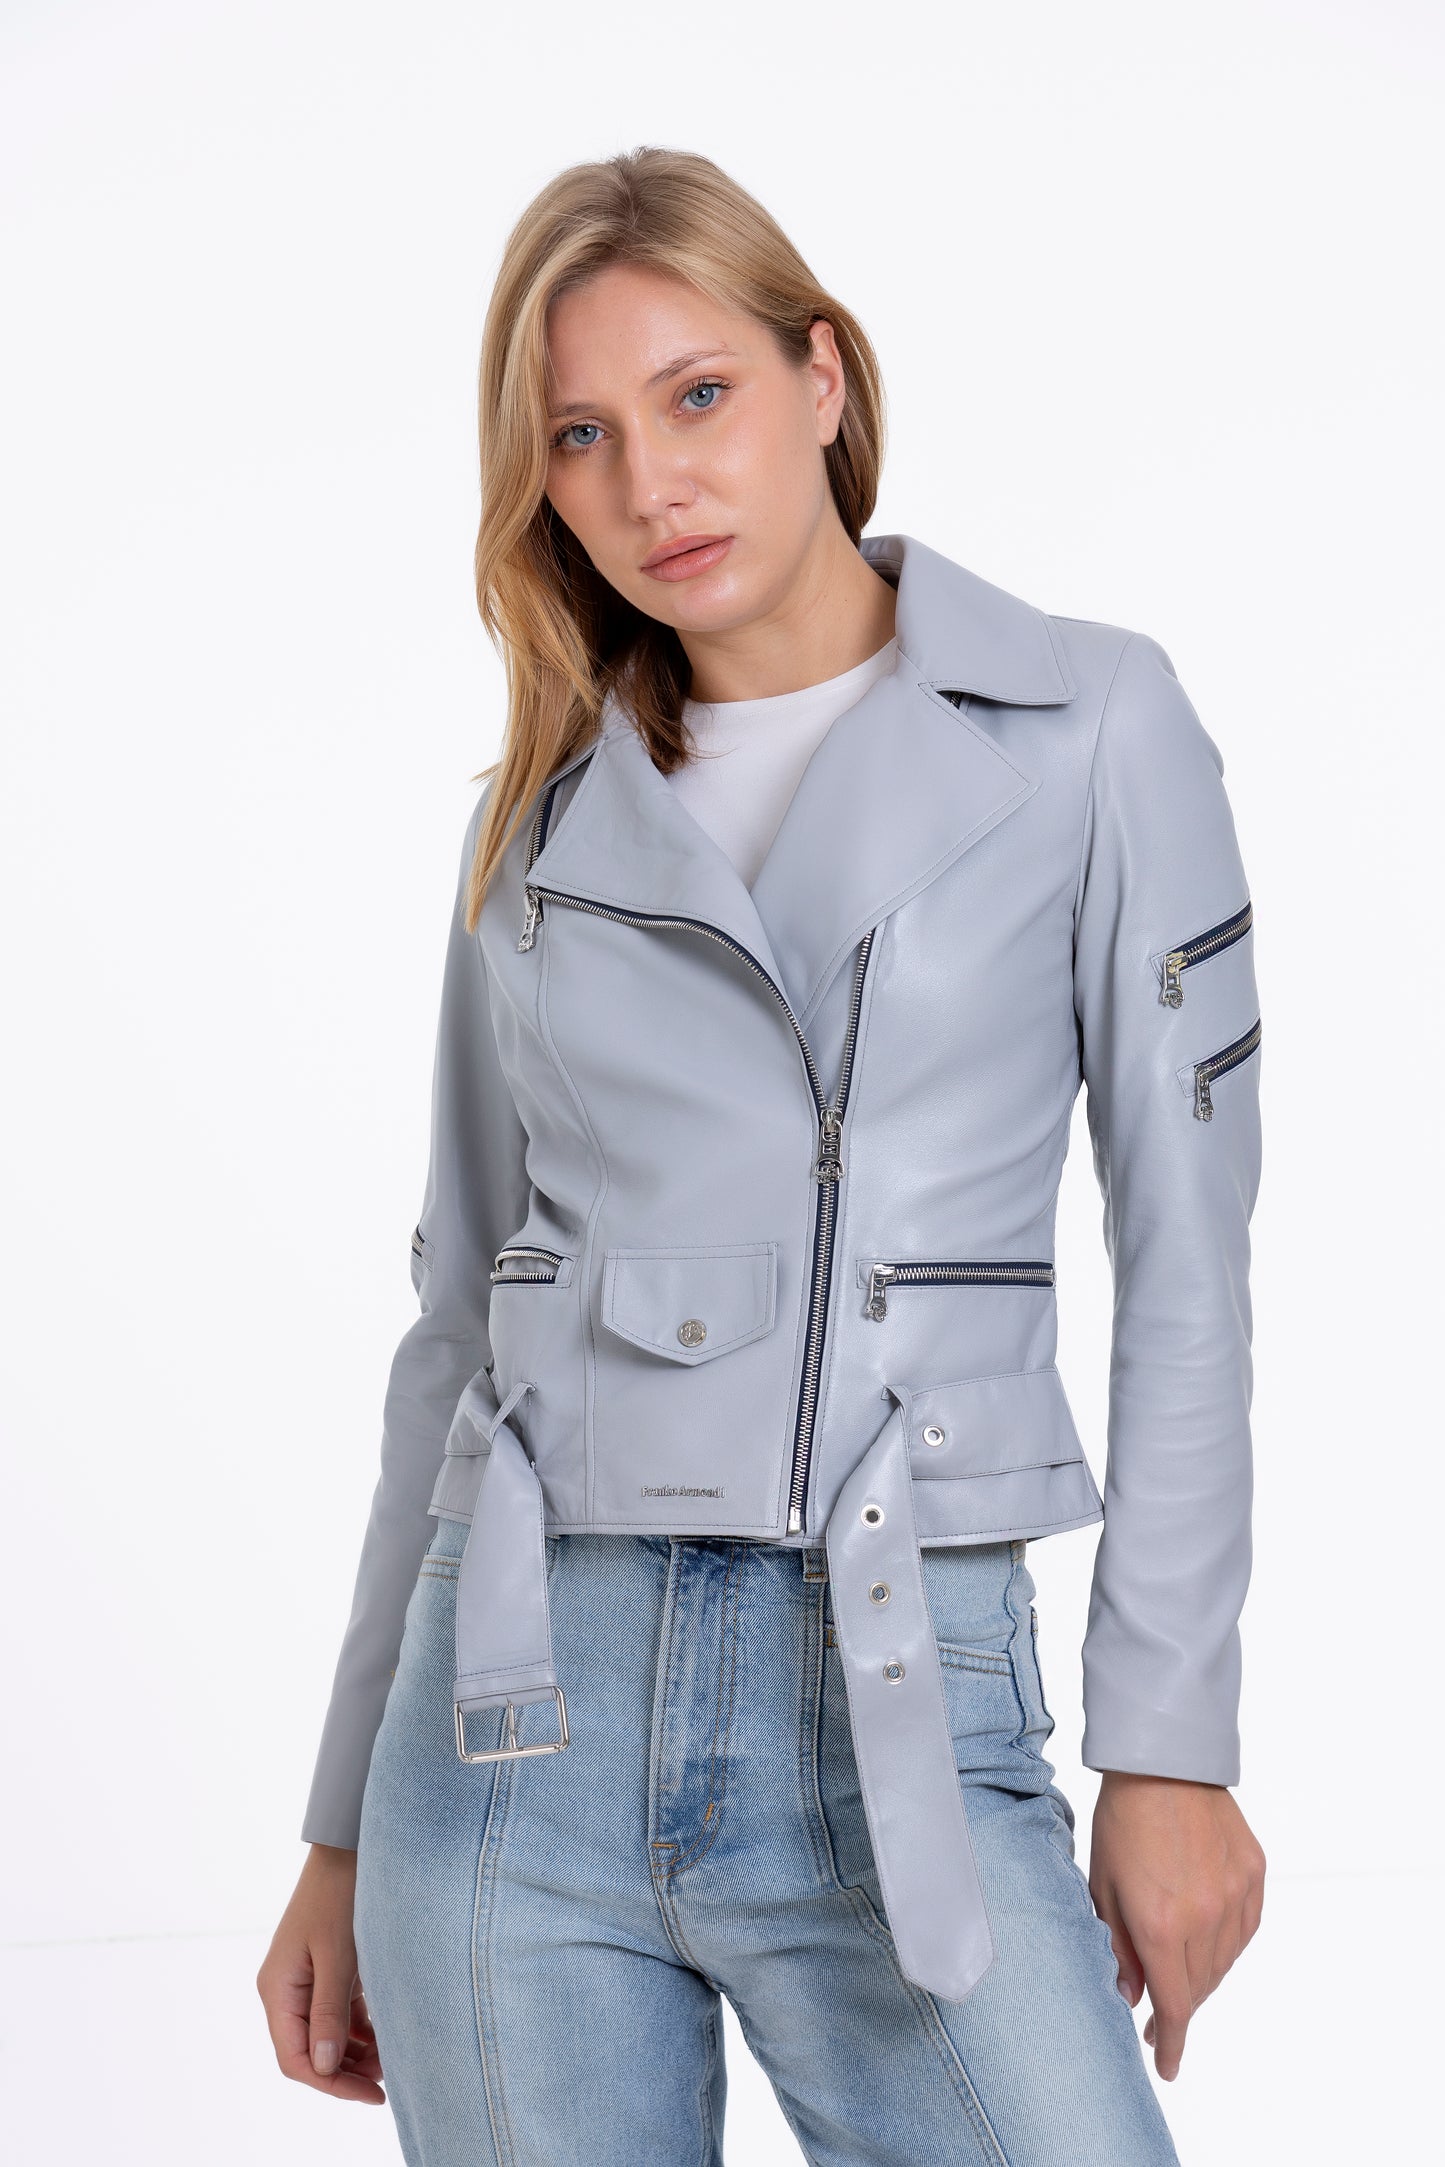 The Rodos Leather Gray Jacket